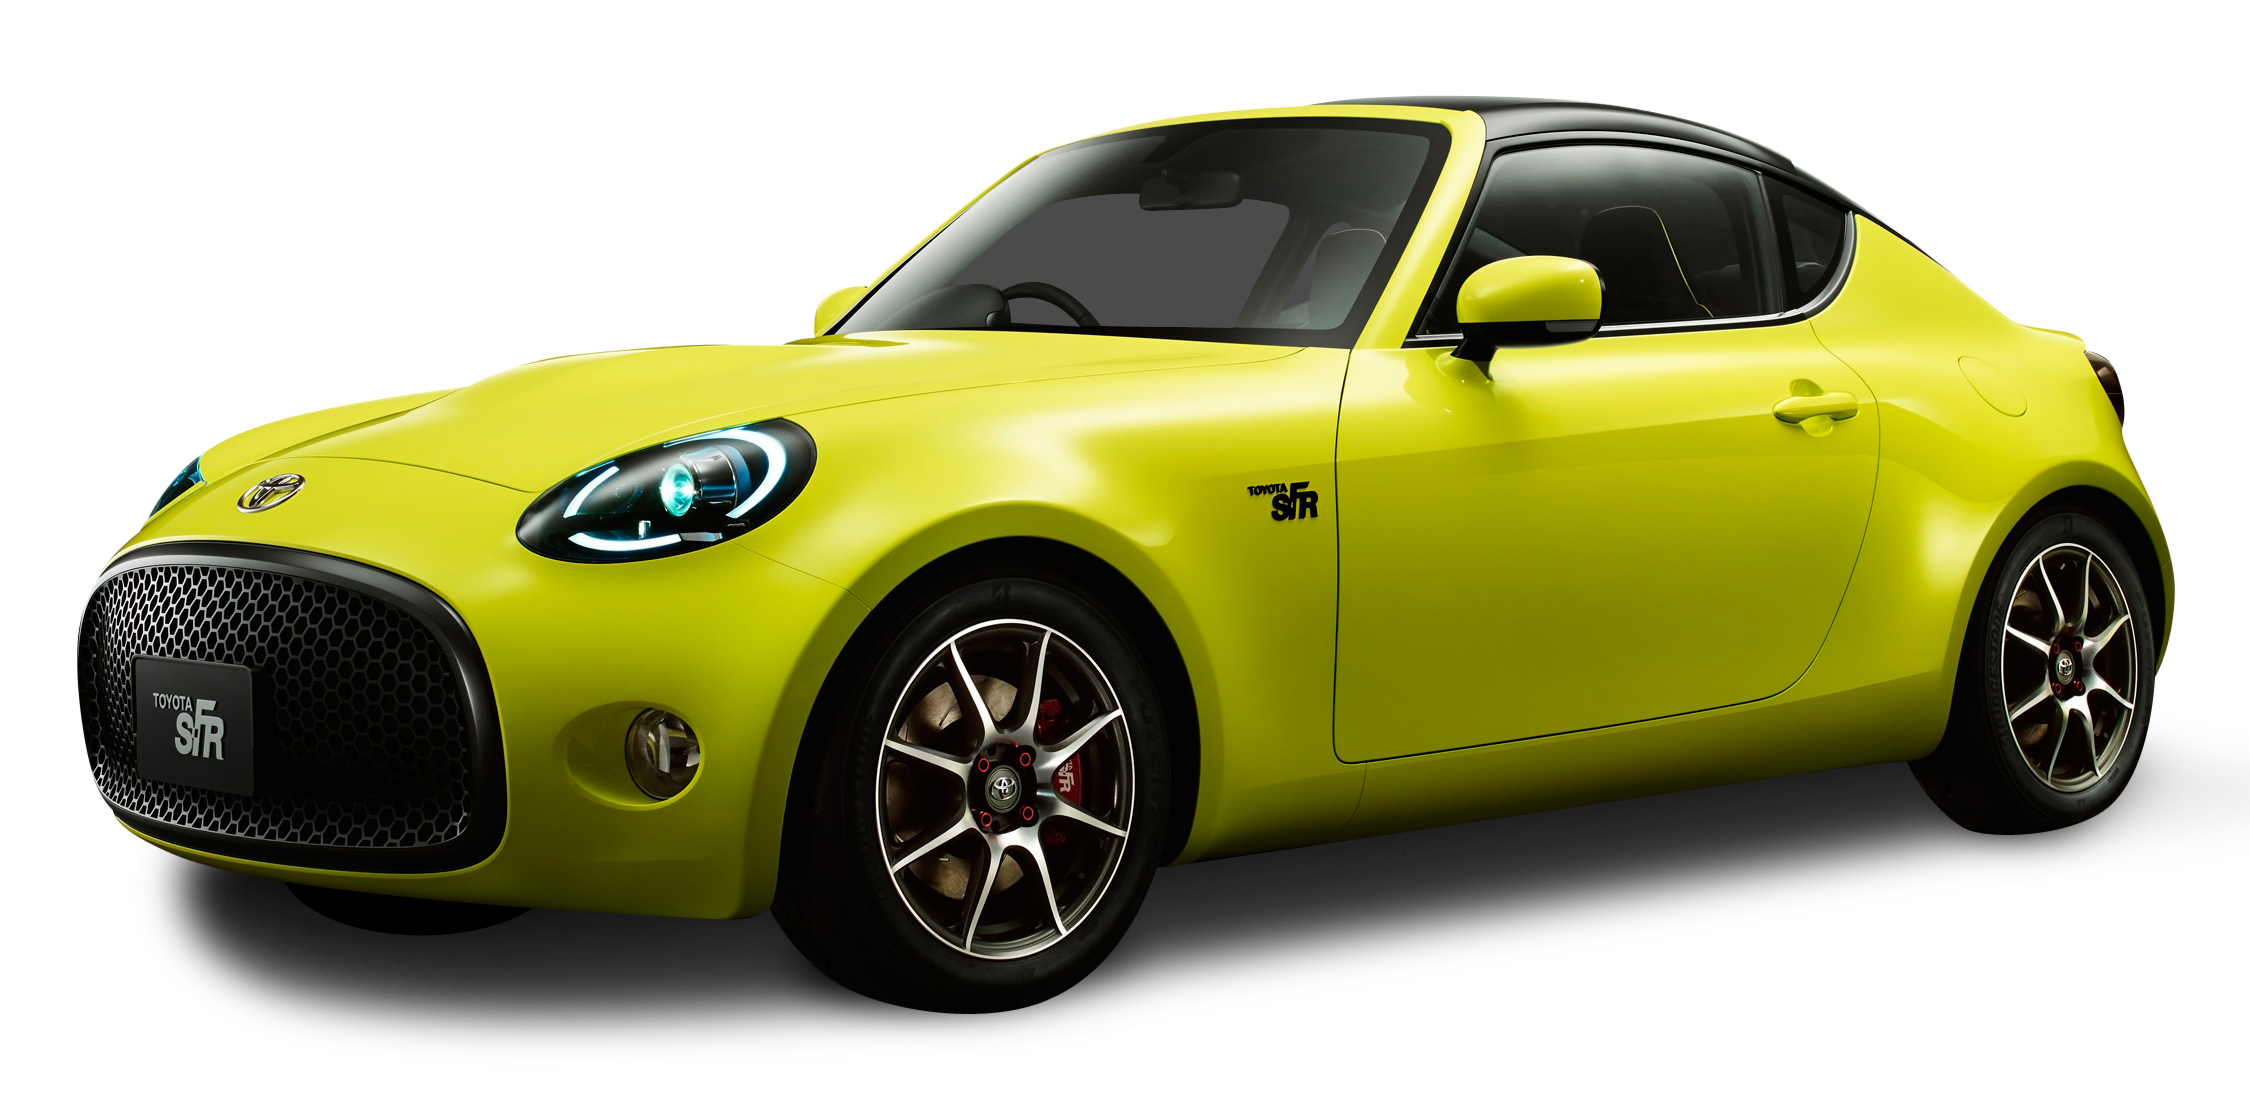 Green Toyota S FR Car PNG Image